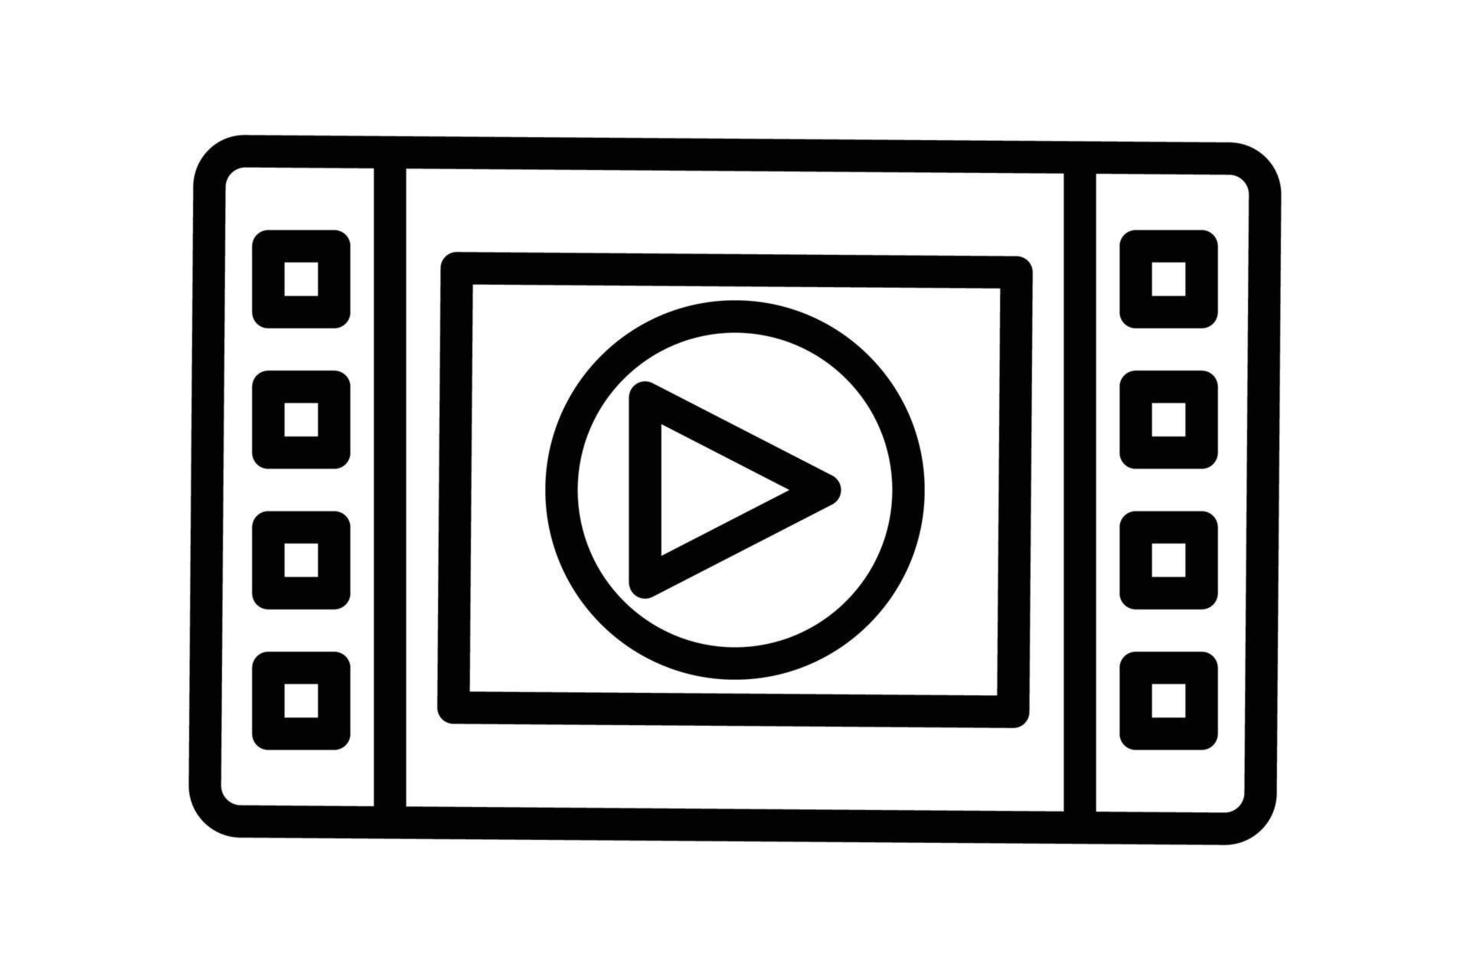 Video clips icon illustration. icon related to music player. Line icon style. Simple vector design editable